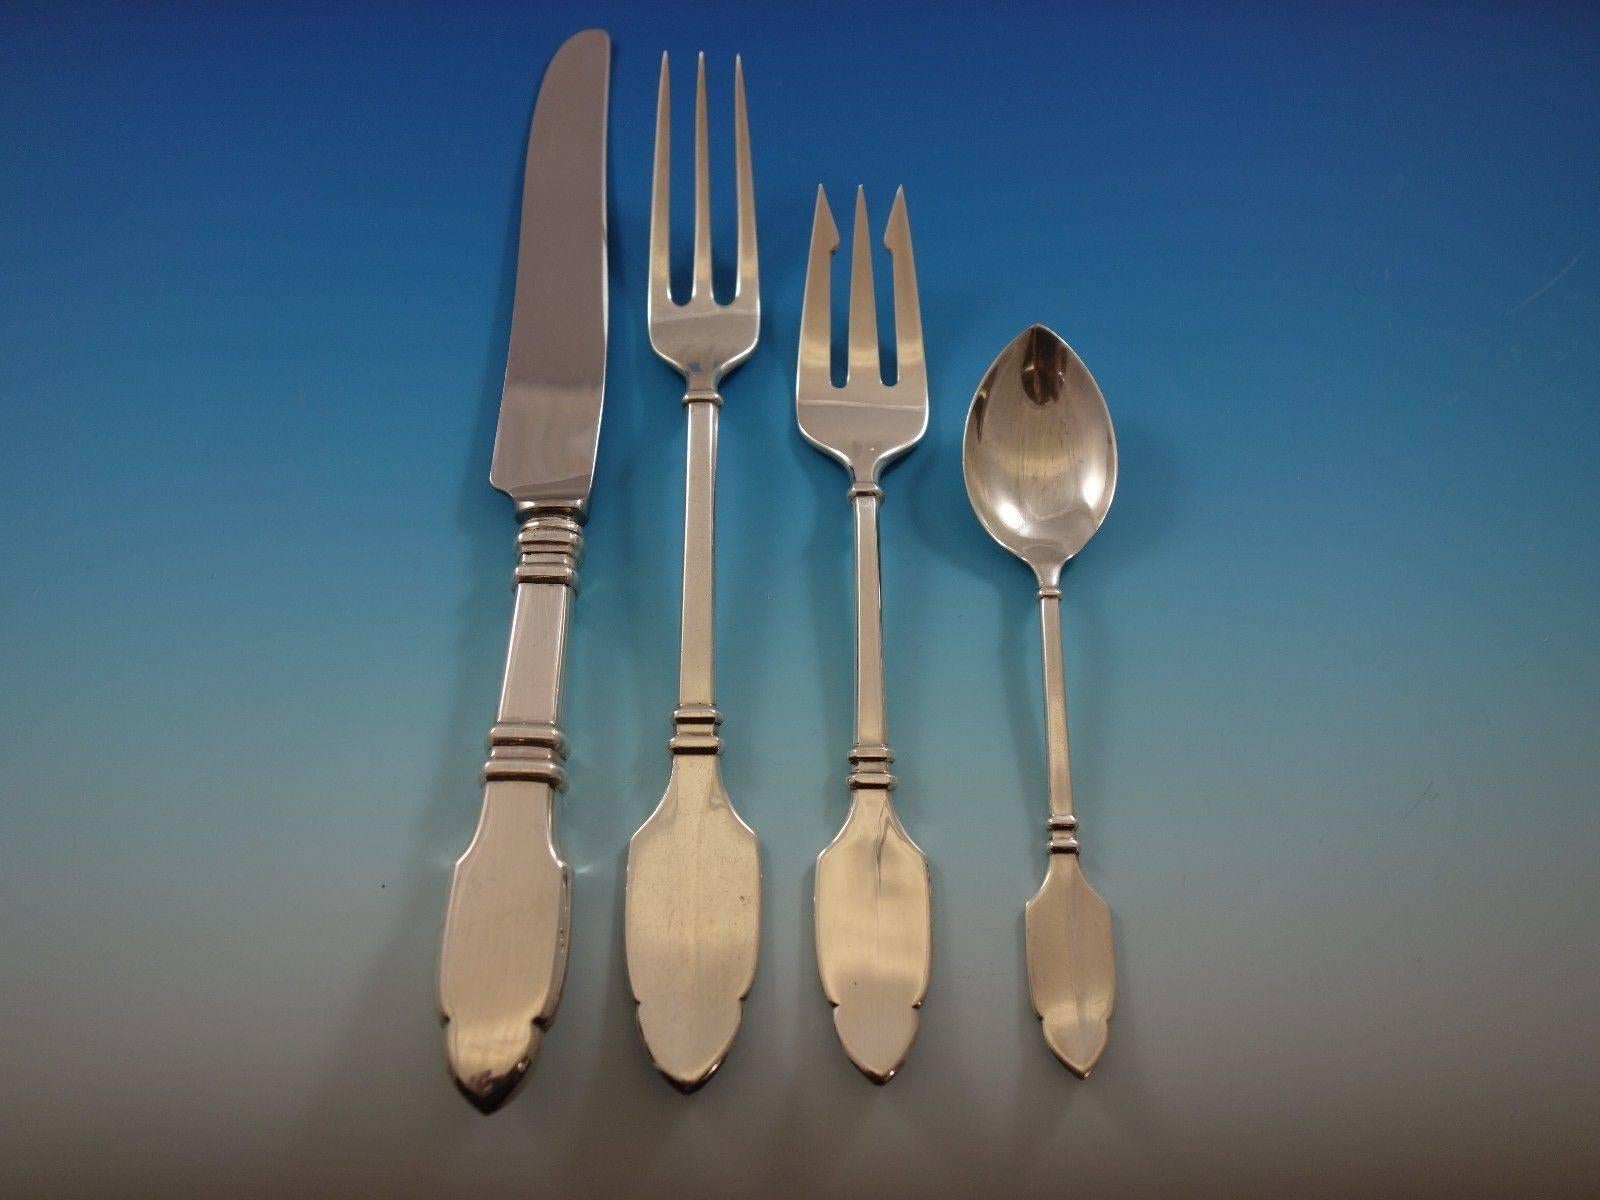 Robert Bruce by Graff, Washbourne and Dunn (circa 1910) sterling silver flatware set of 196 pieces. This set includes: 
48 dinner knives, 9 7/8